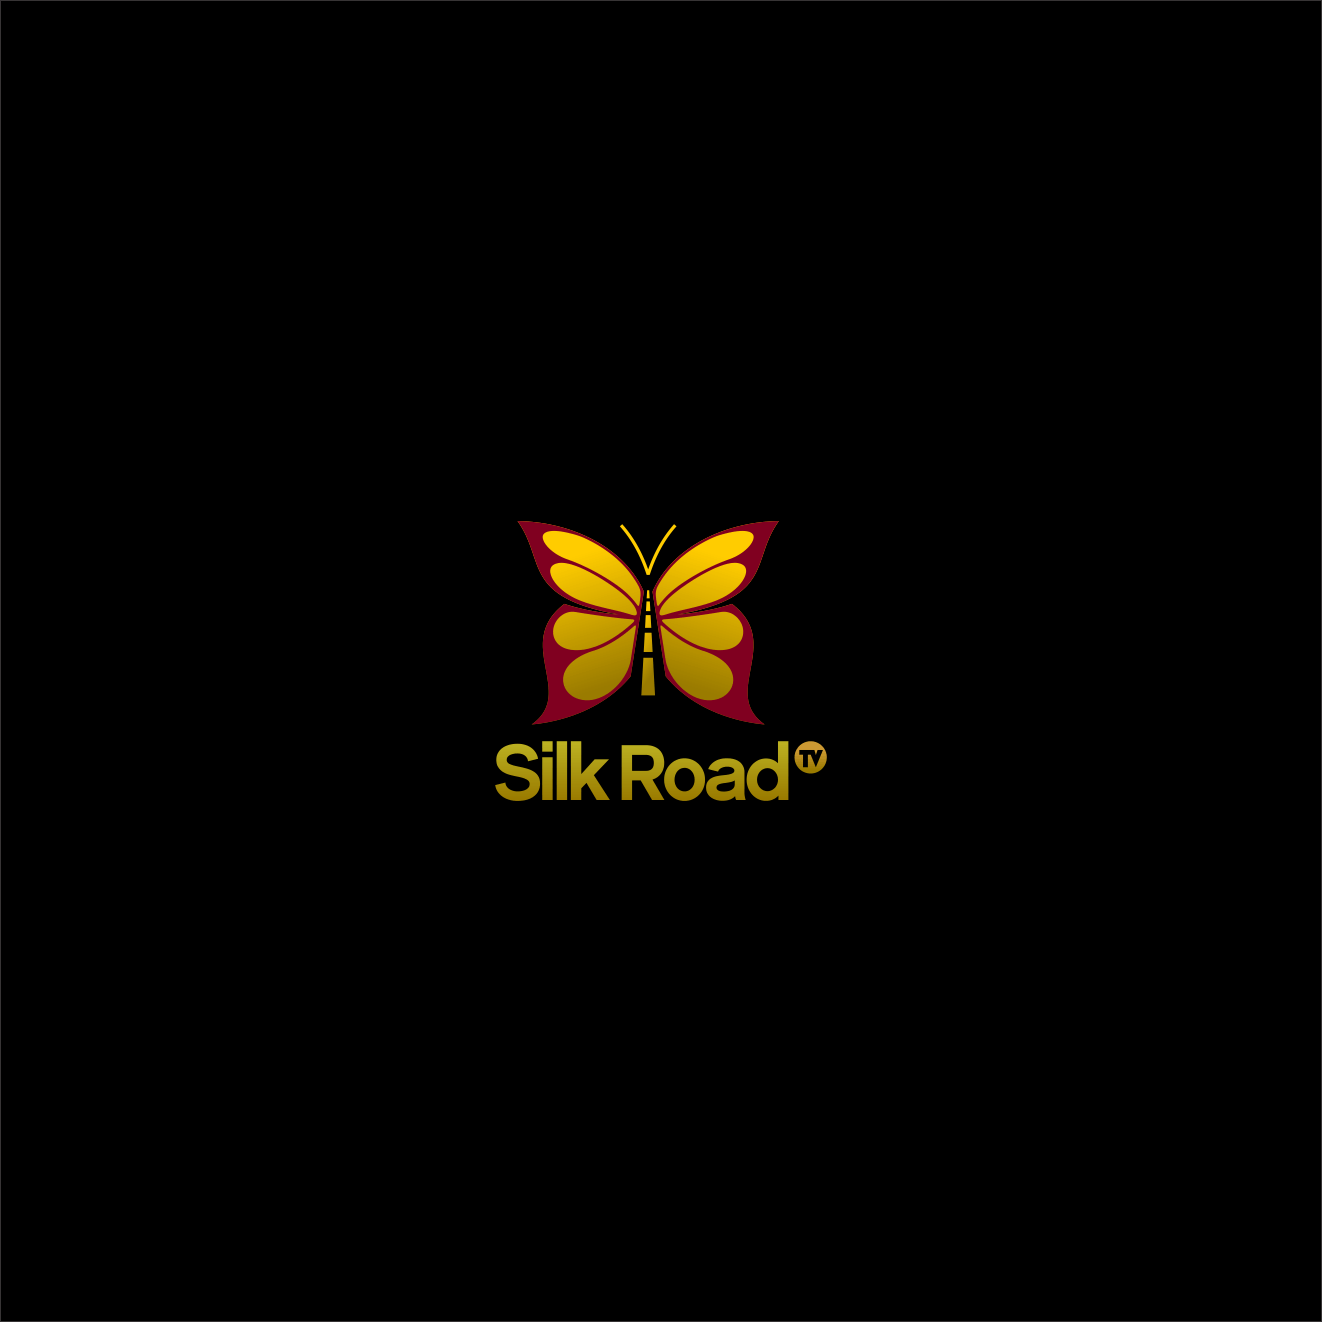 TV Butterfly Logo - Professional, Bold, Television Station Logo Design for Silk Road TV